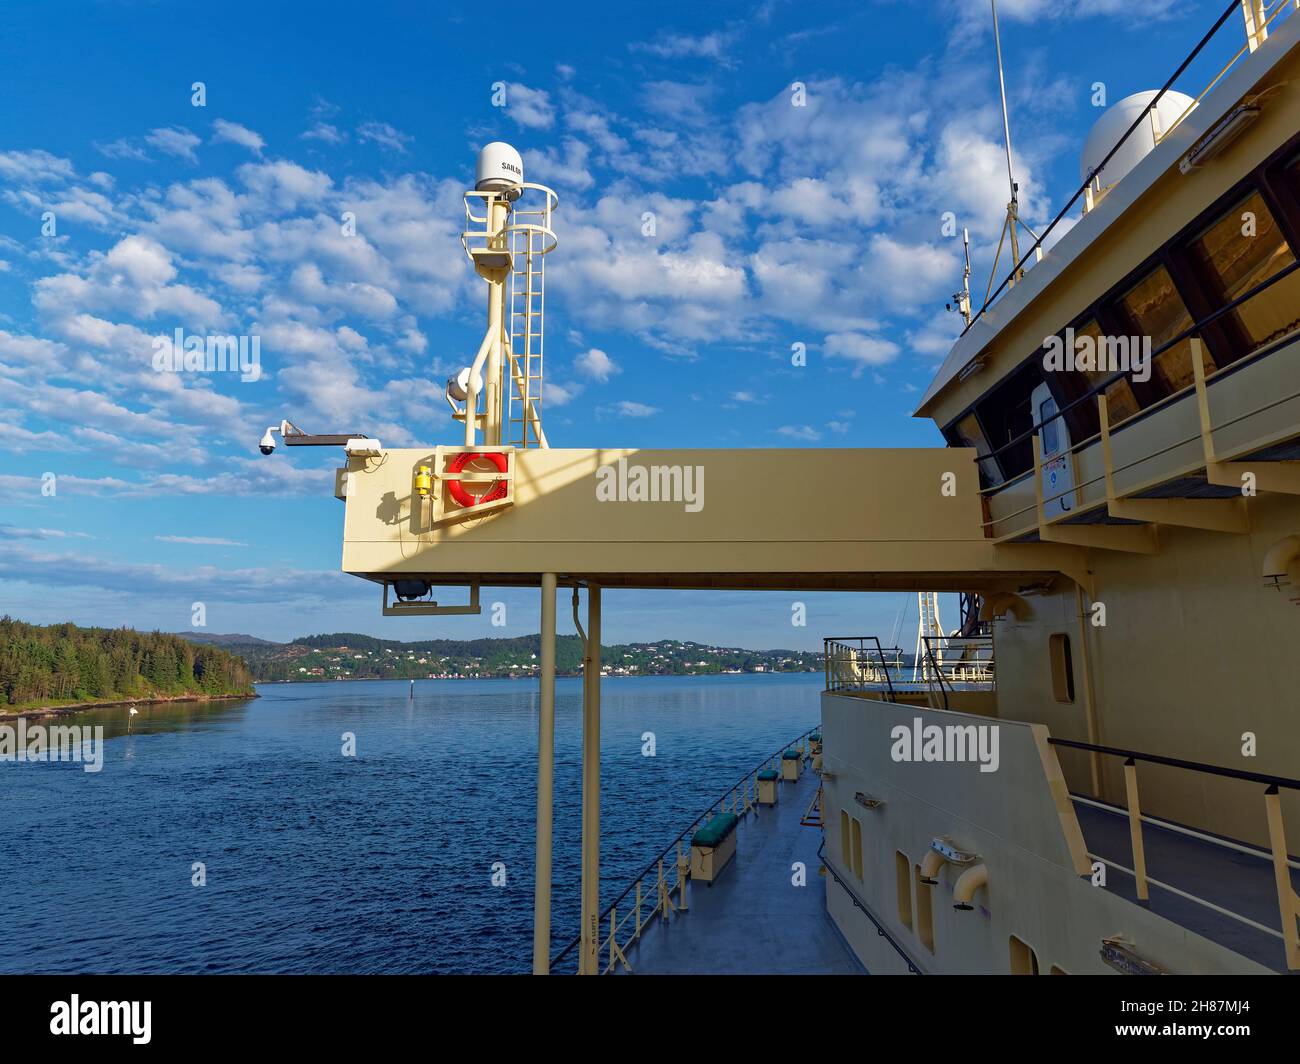 A View of the Port Side Bridge wing of the Ramform Vanguard as it transits up Bergen Fjord on a bright Summers Morning. Stock Photo